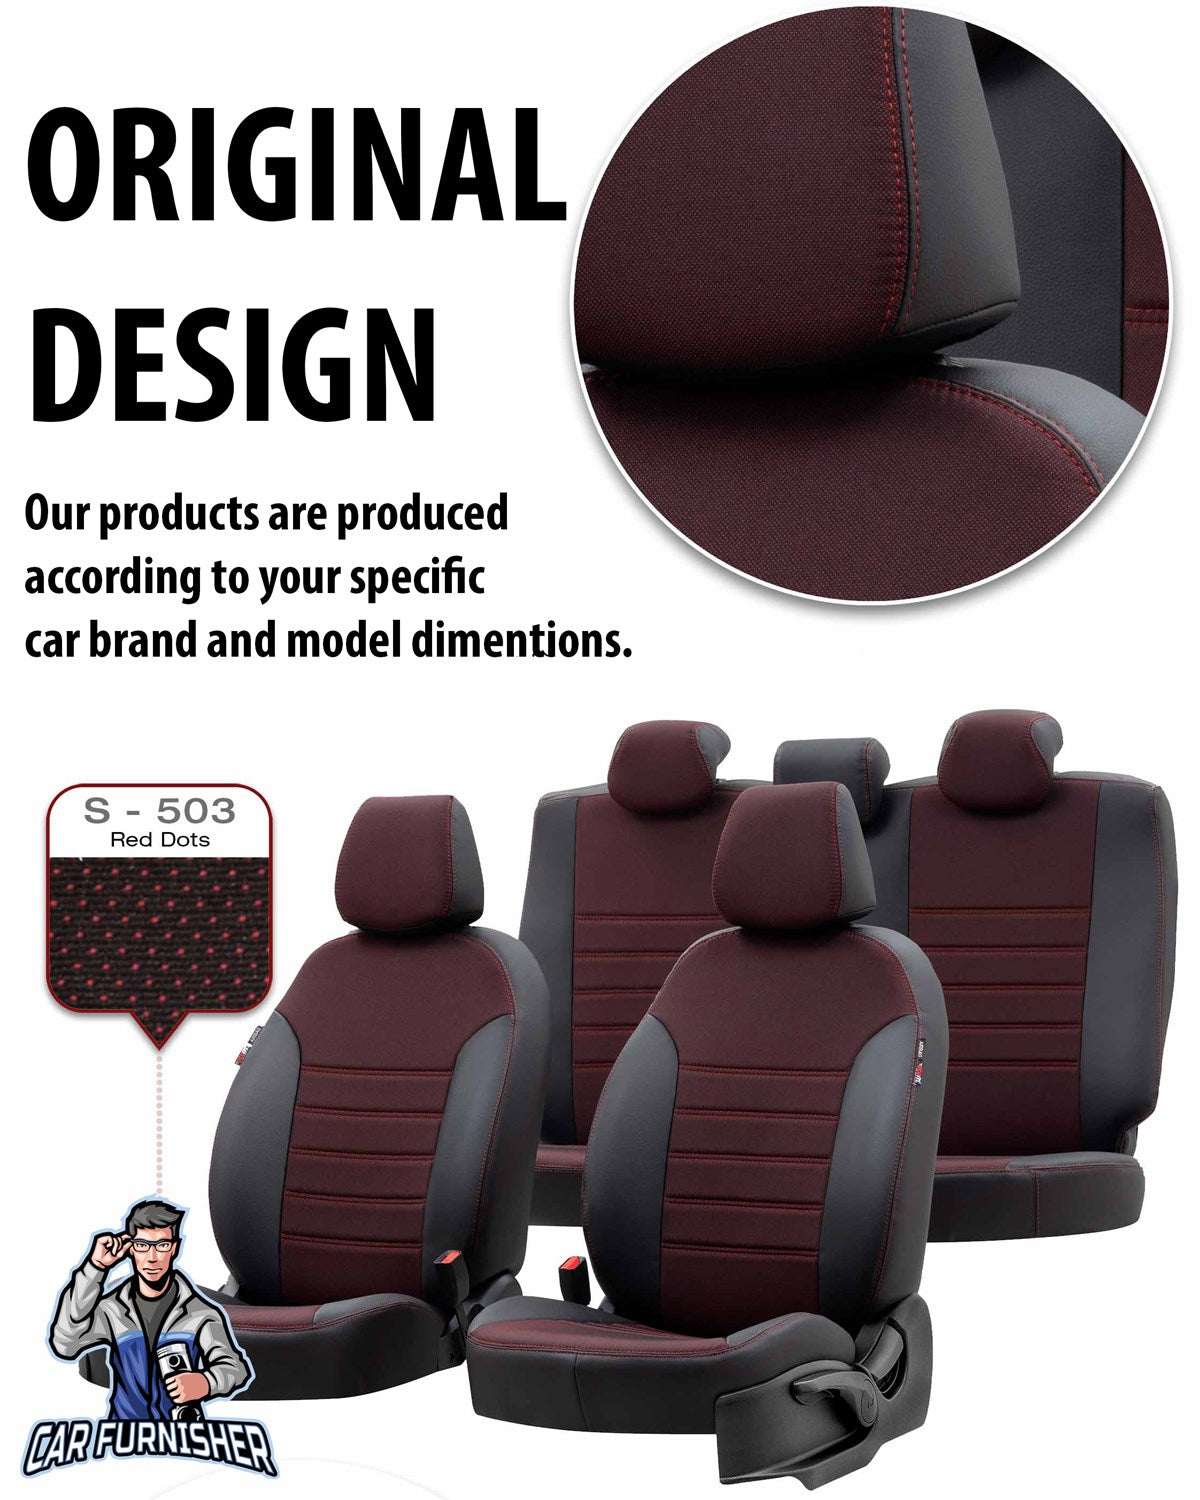 Opel Frontera Seat Cover Paris Leather & Jacquard Design Red Leather & Jacquard Fabric